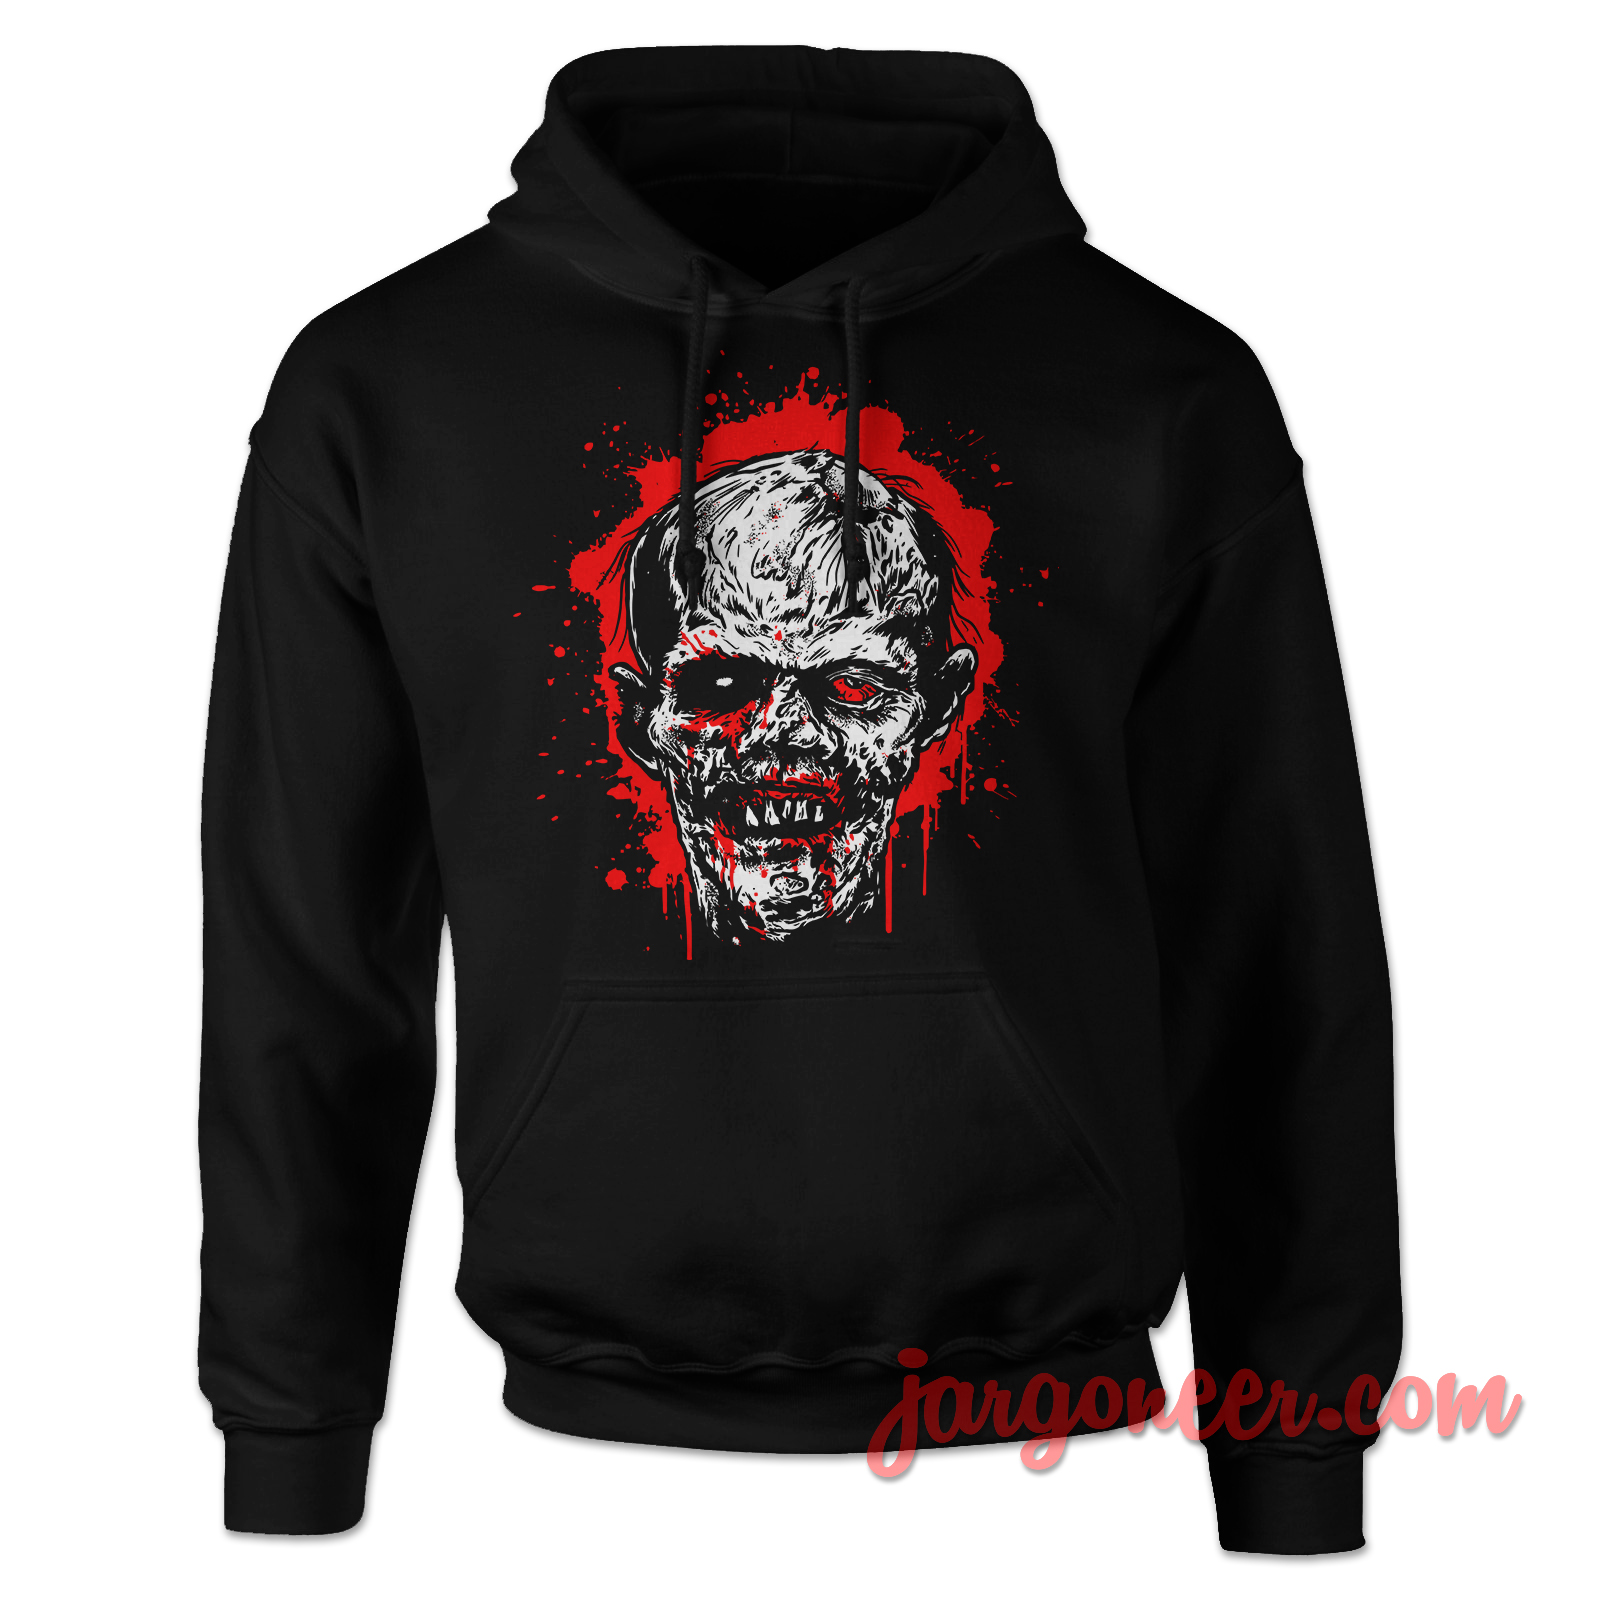 Bloody Head Of Zombie Black Hoody - Shop Unique Graphic Cool Shirt Designs